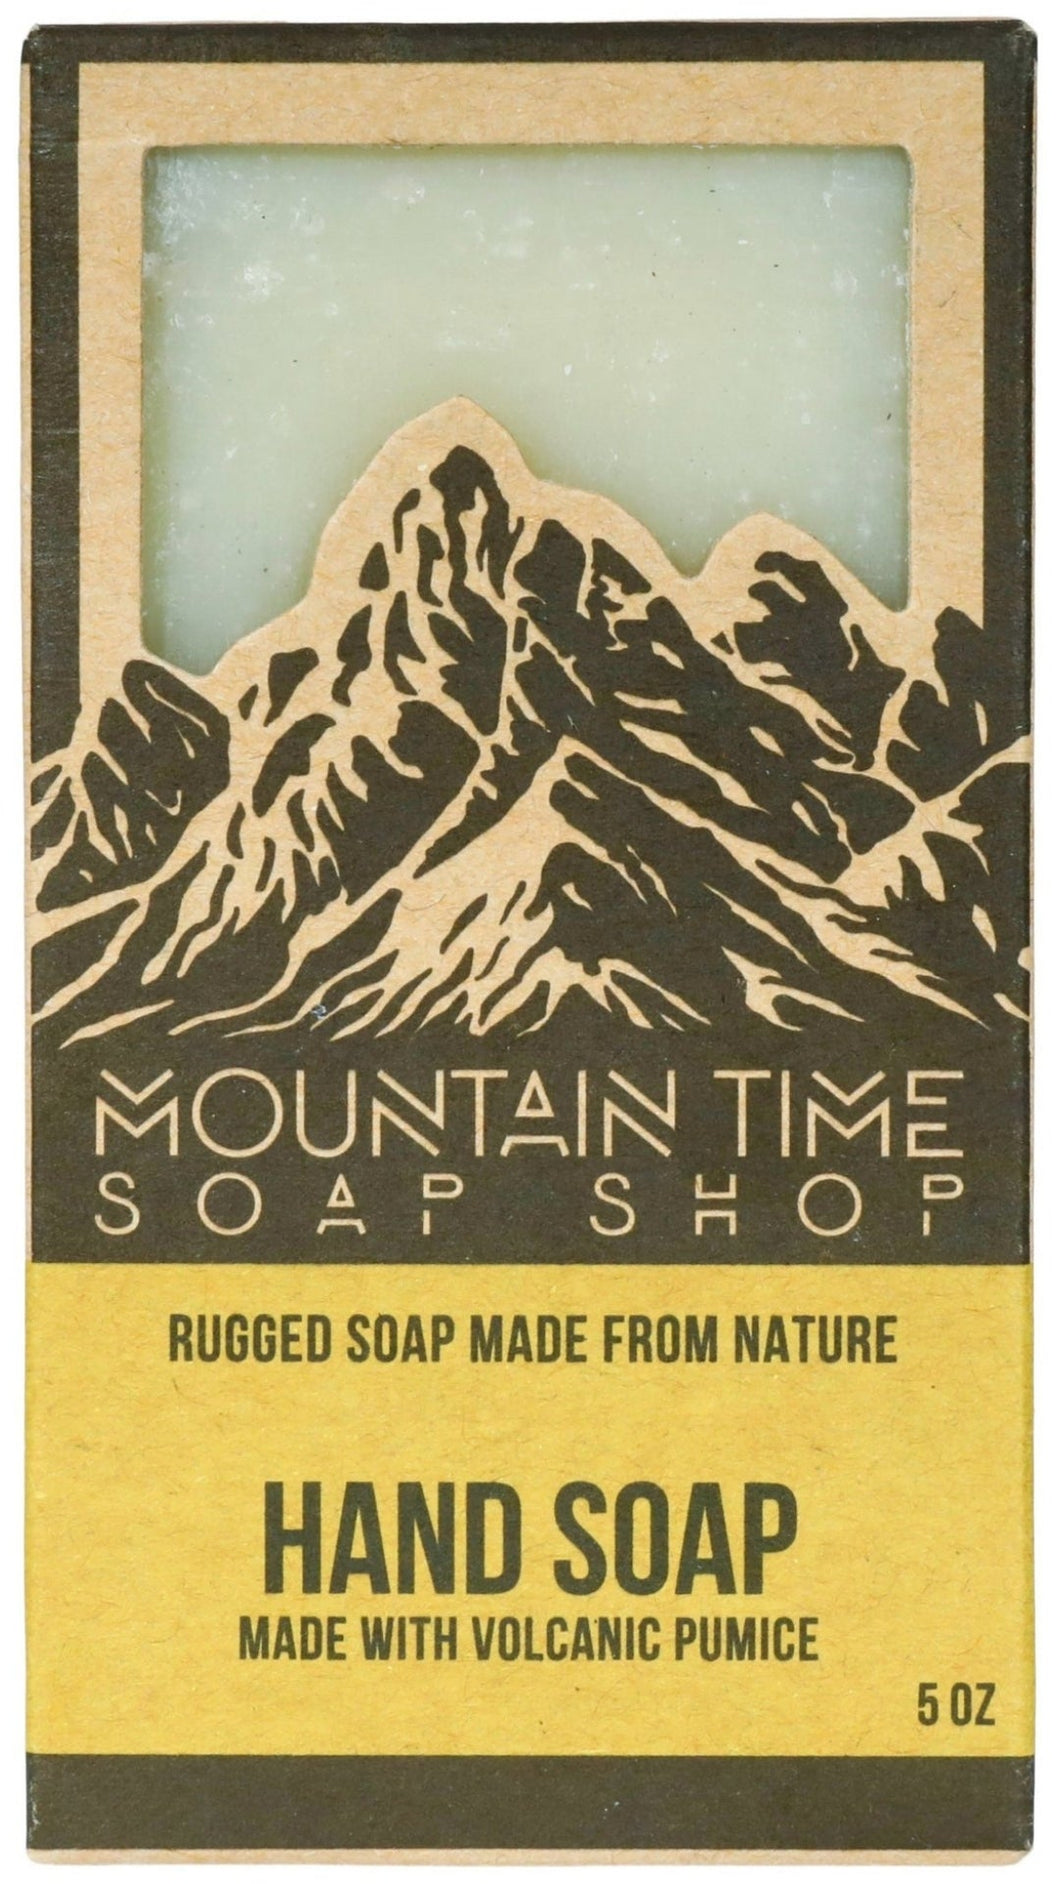 Hand Soap with Volcanic Pumice